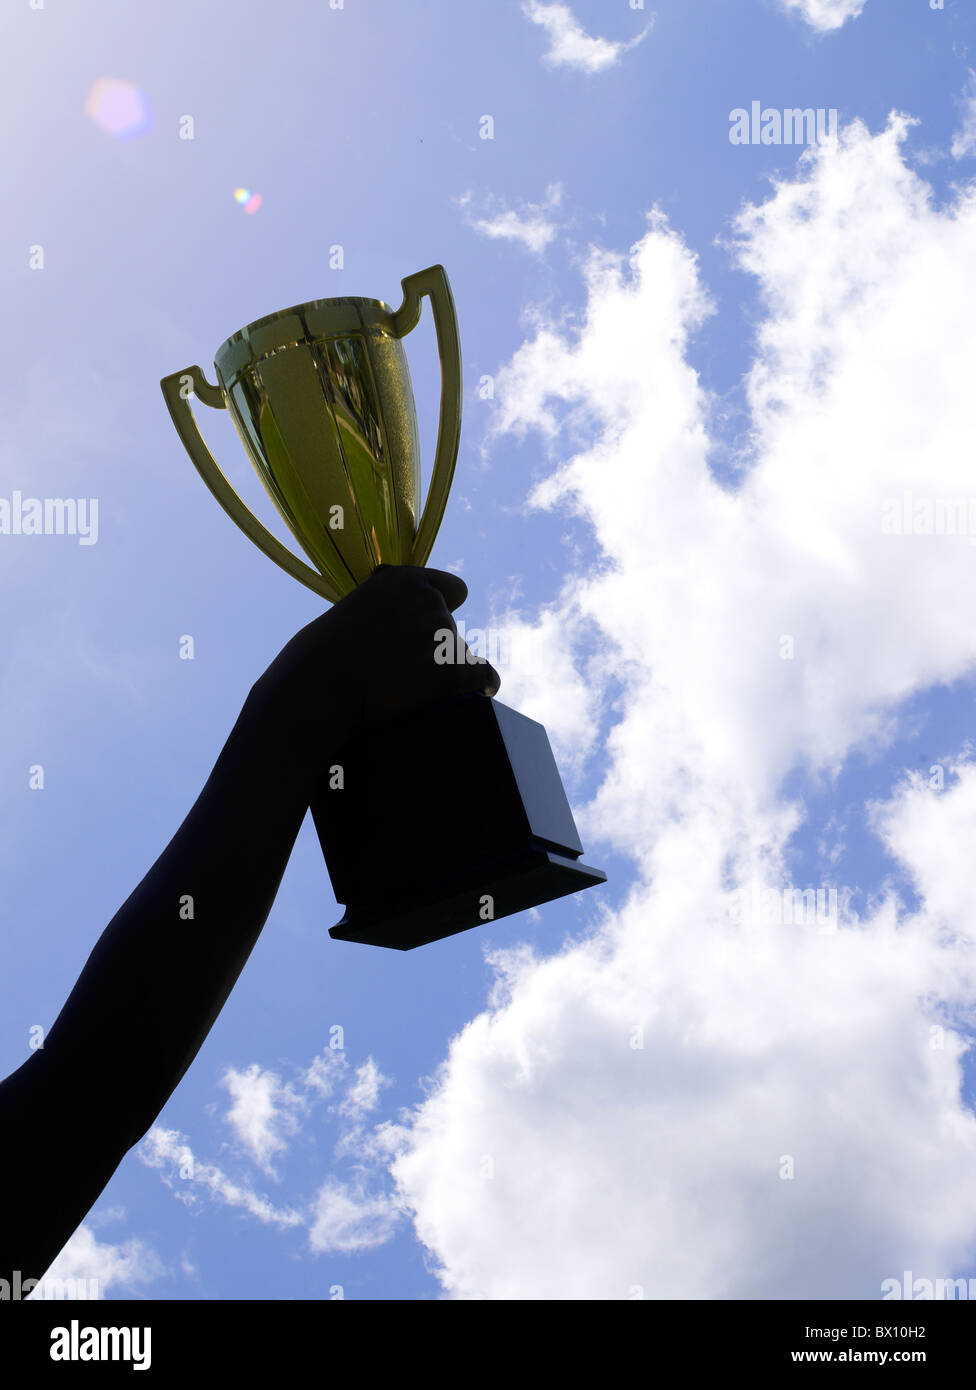 A victorious person holds up a large, gleaming trophy cup, silhouetted against a vivid blue sky with a few wispy clouds. Stock Photo